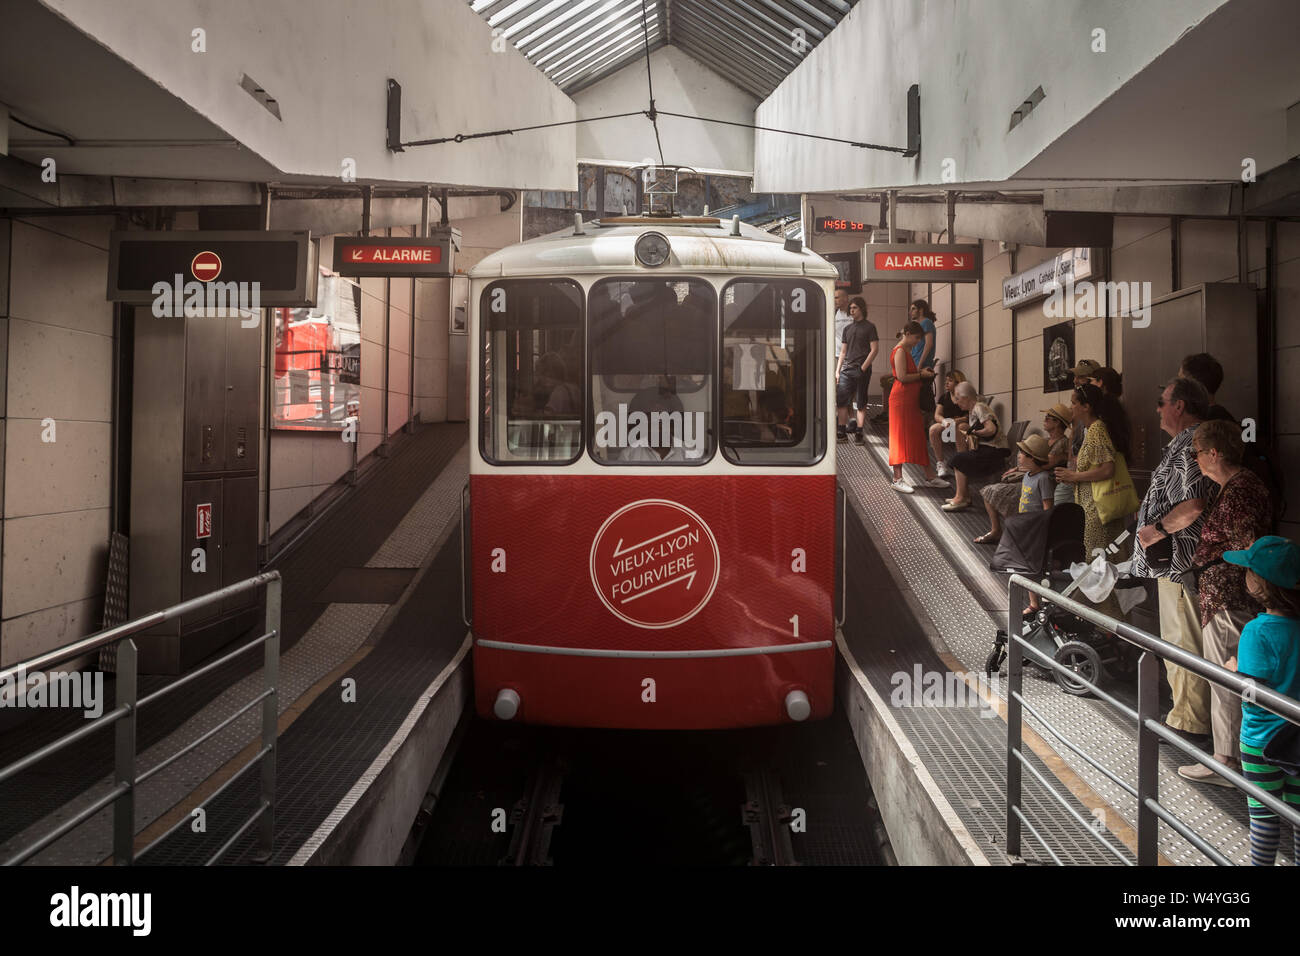 LYON, FRANCE - JULY 19, 2019: Lyon Funicular Railway entering the station of Old Lyon with tourists preparing to enter, before bringing them to Fourvi Stock Photo